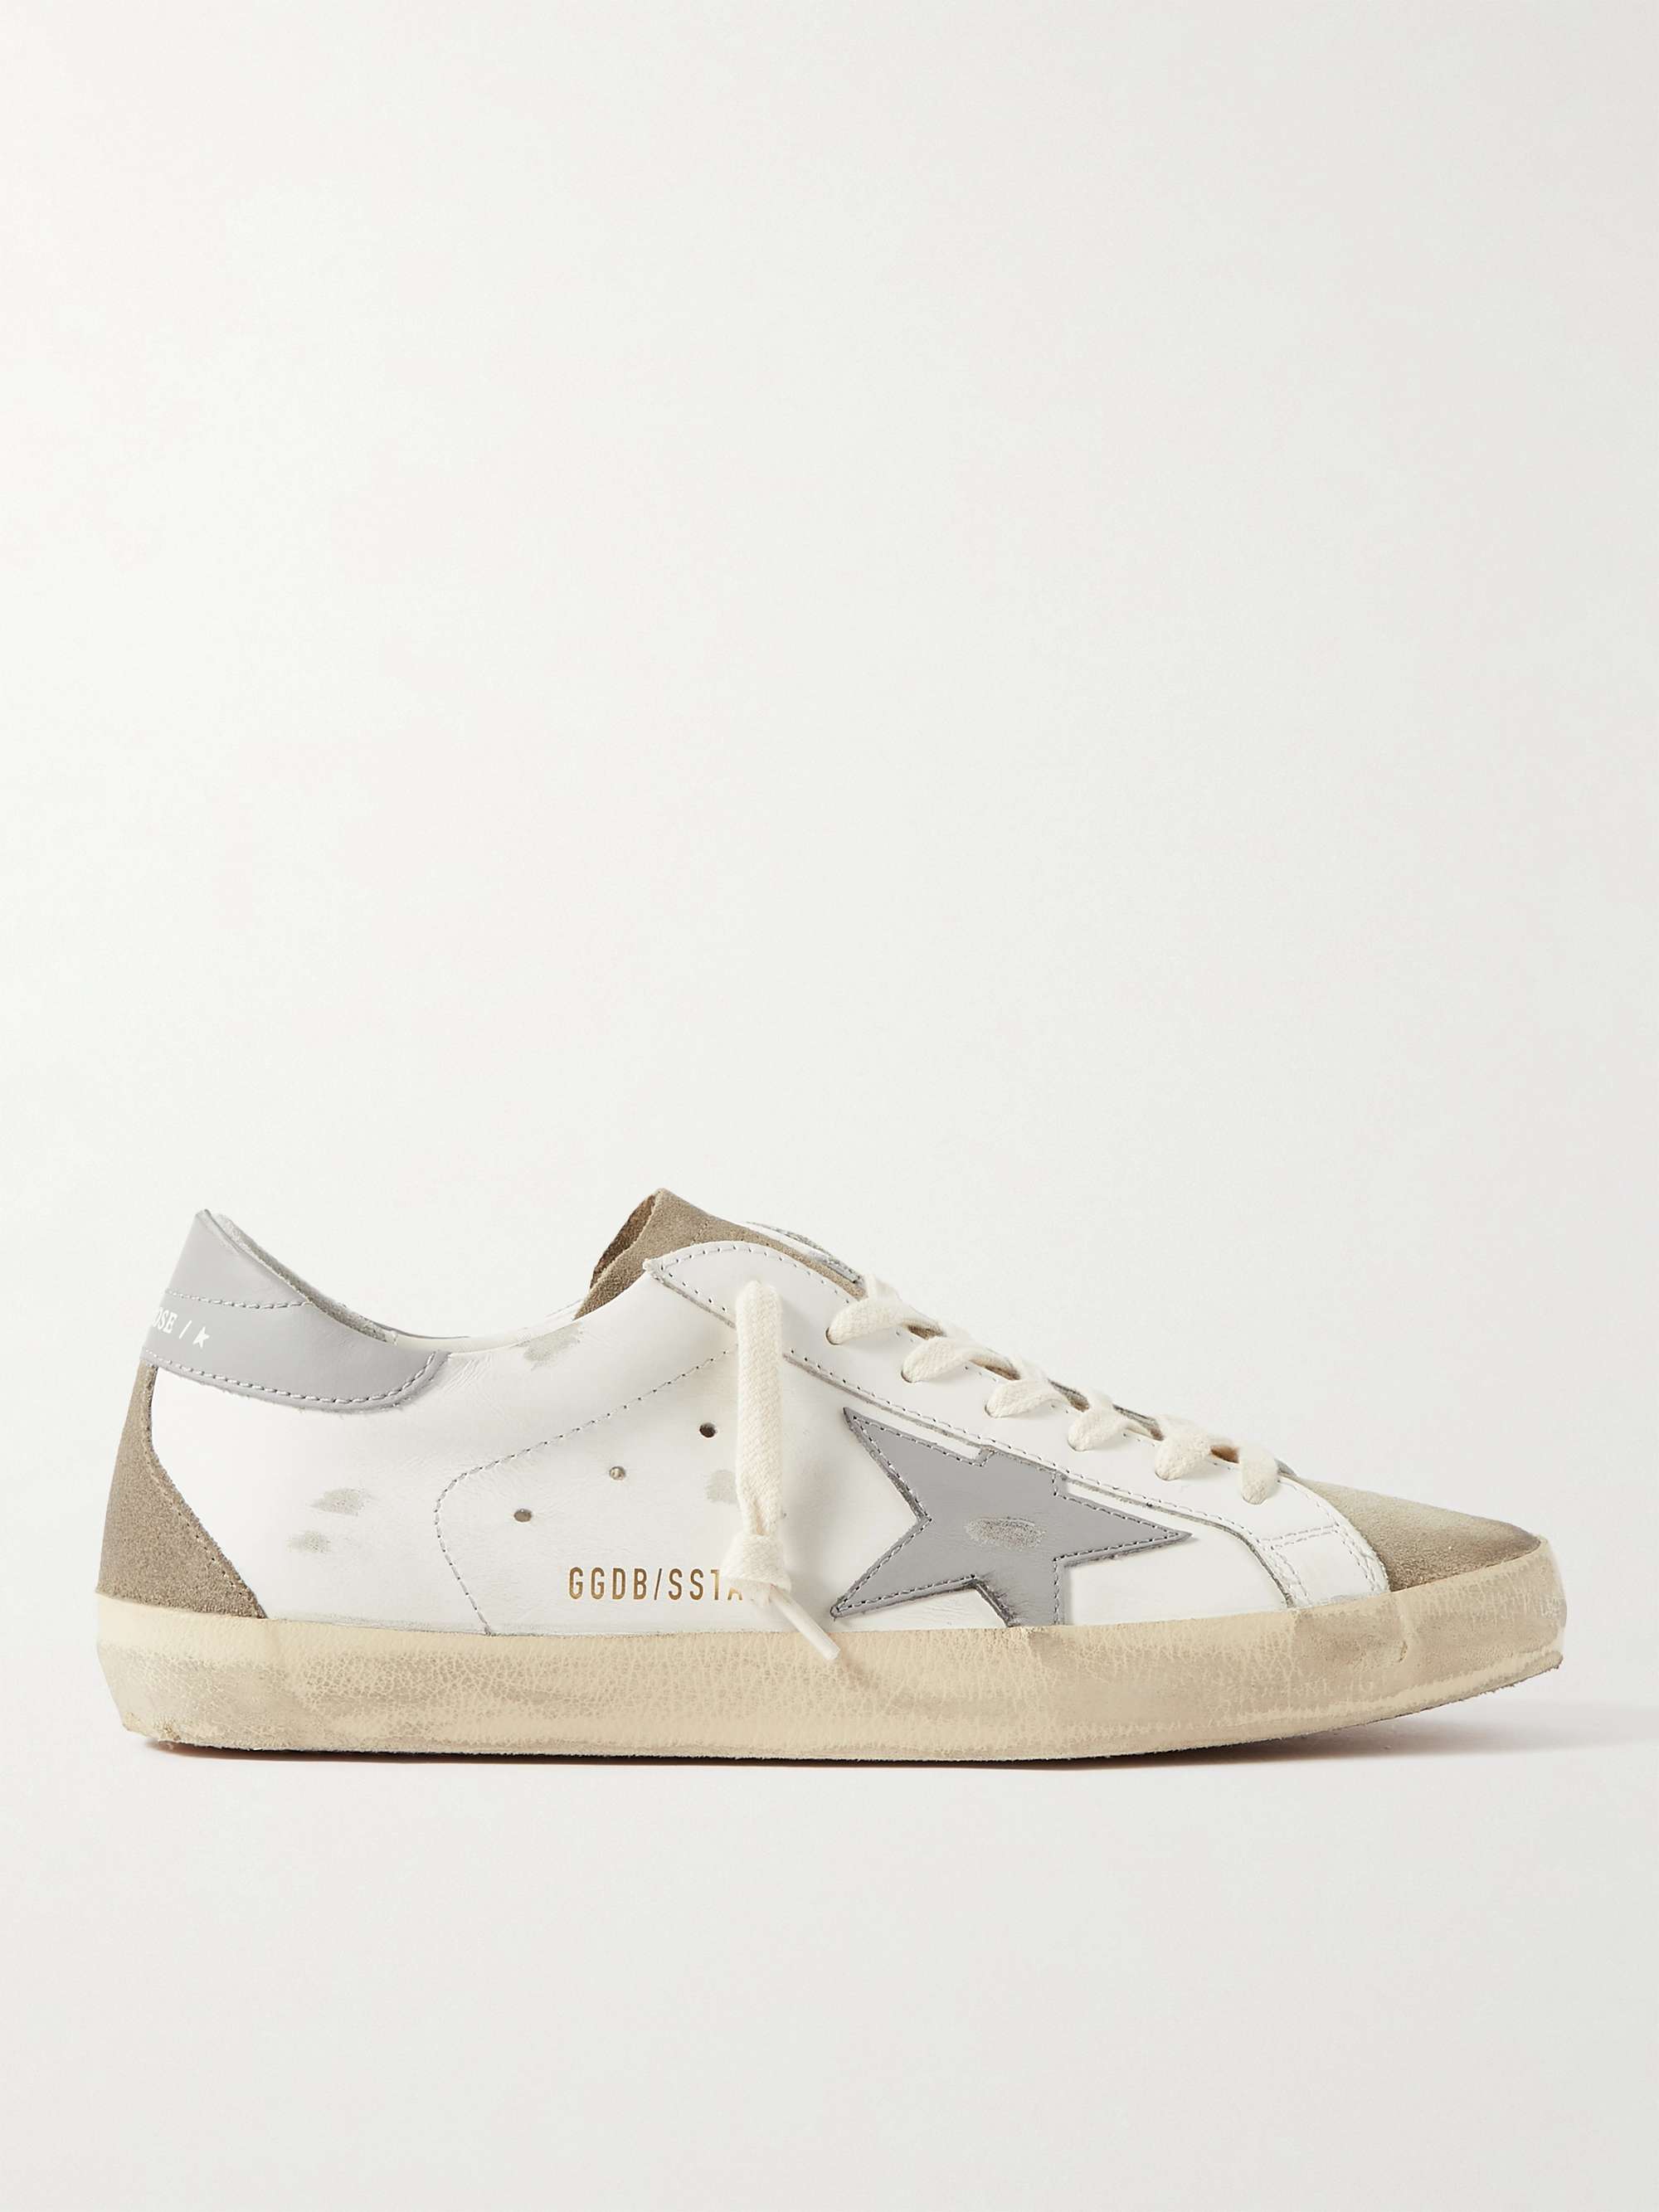 GOLDEN GOOSE Superstar Distressed Leather and Suede Sneakers for Men ...